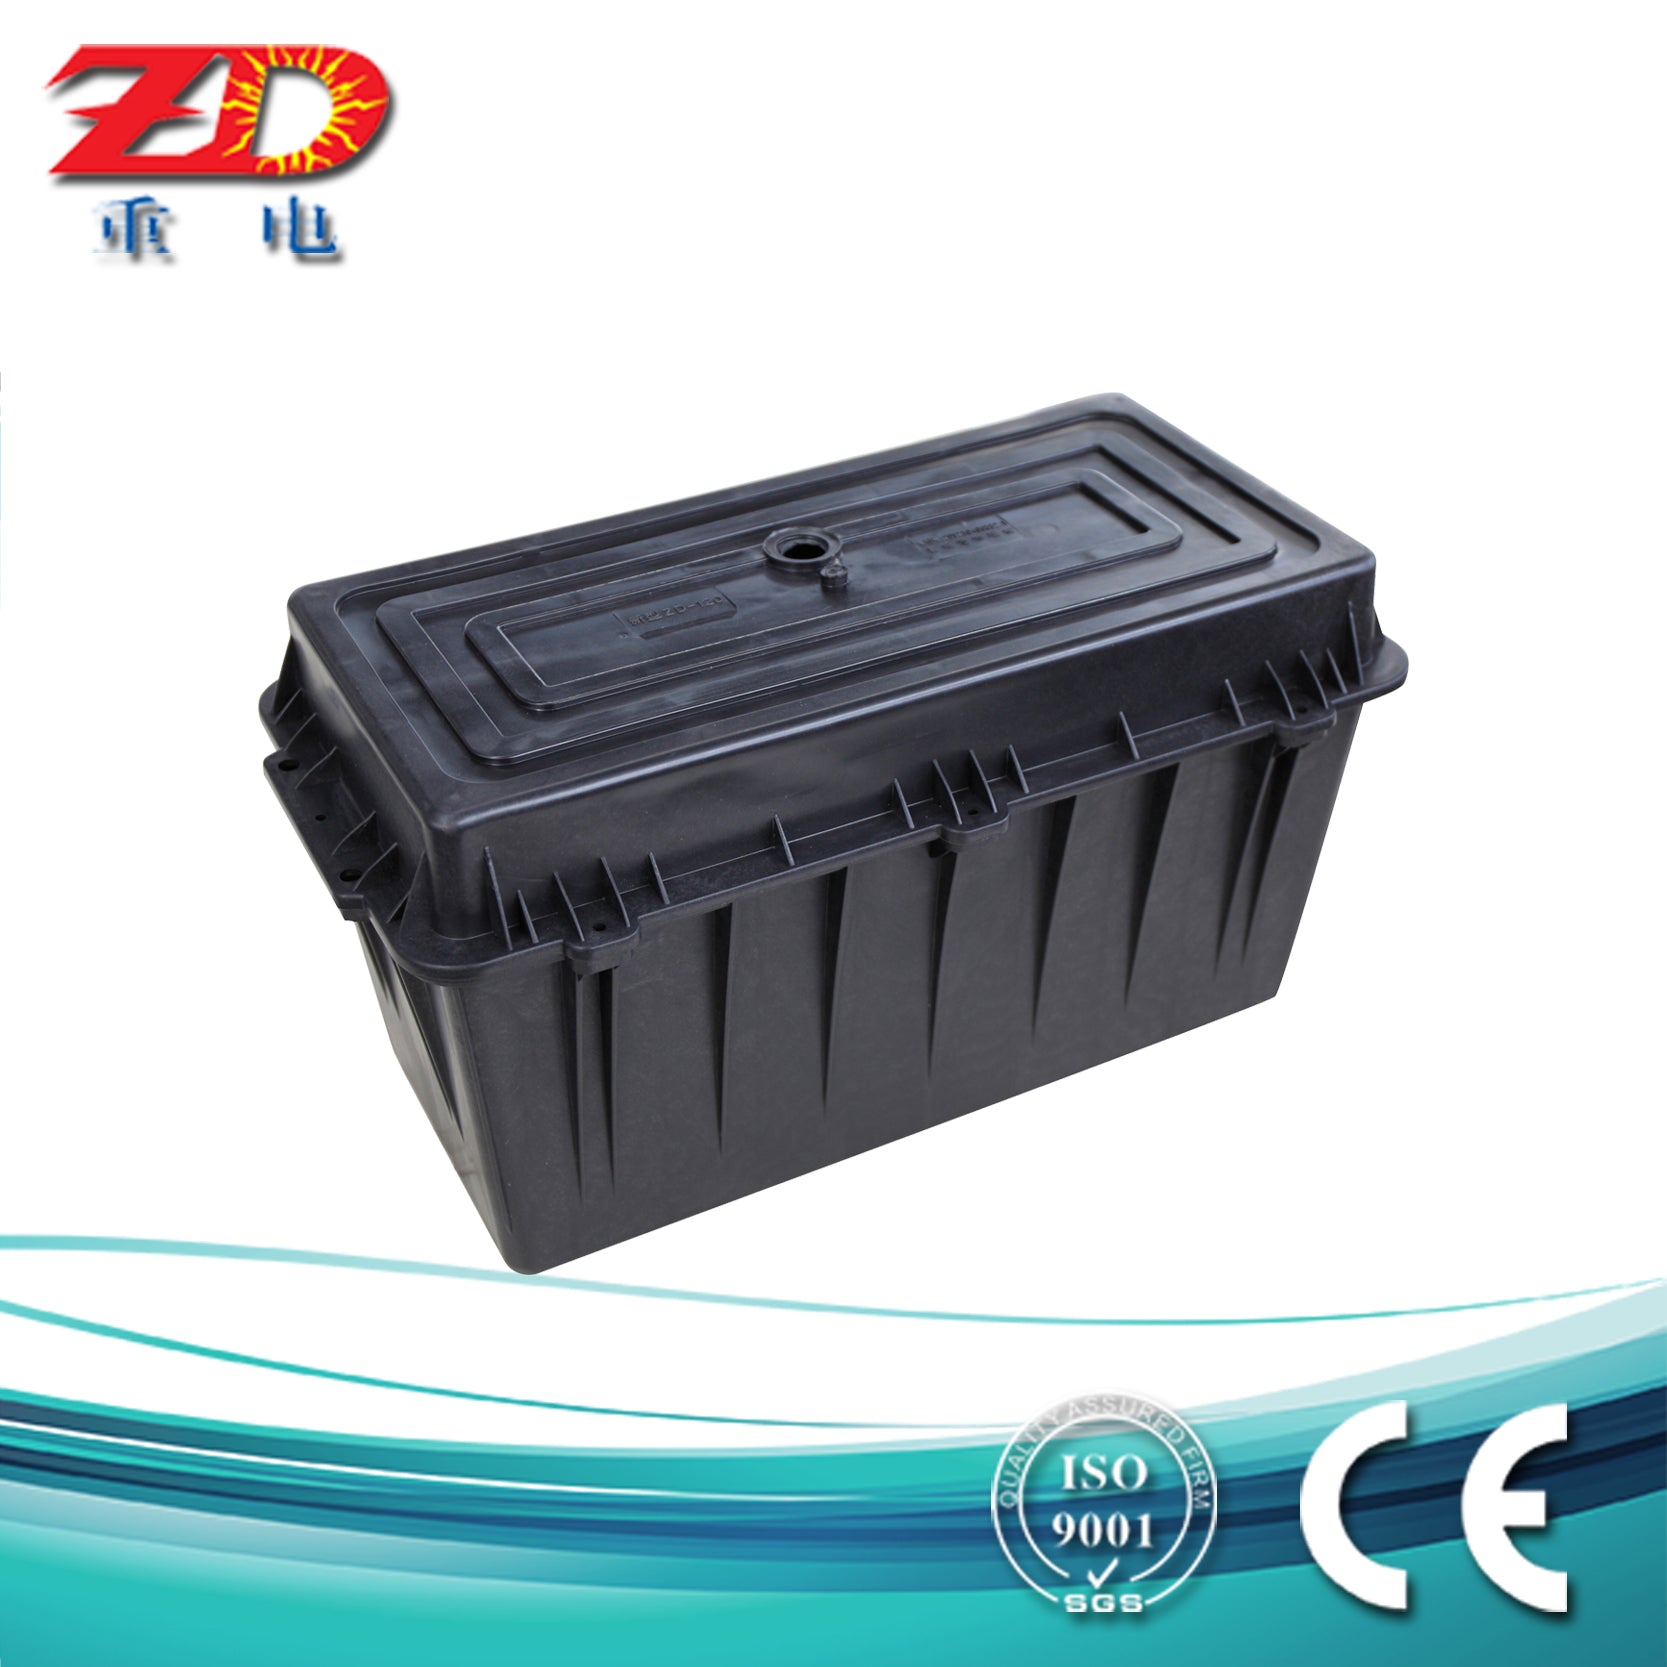 Battery Box Underground Quality Suit 2x 12v 24ah Batteries